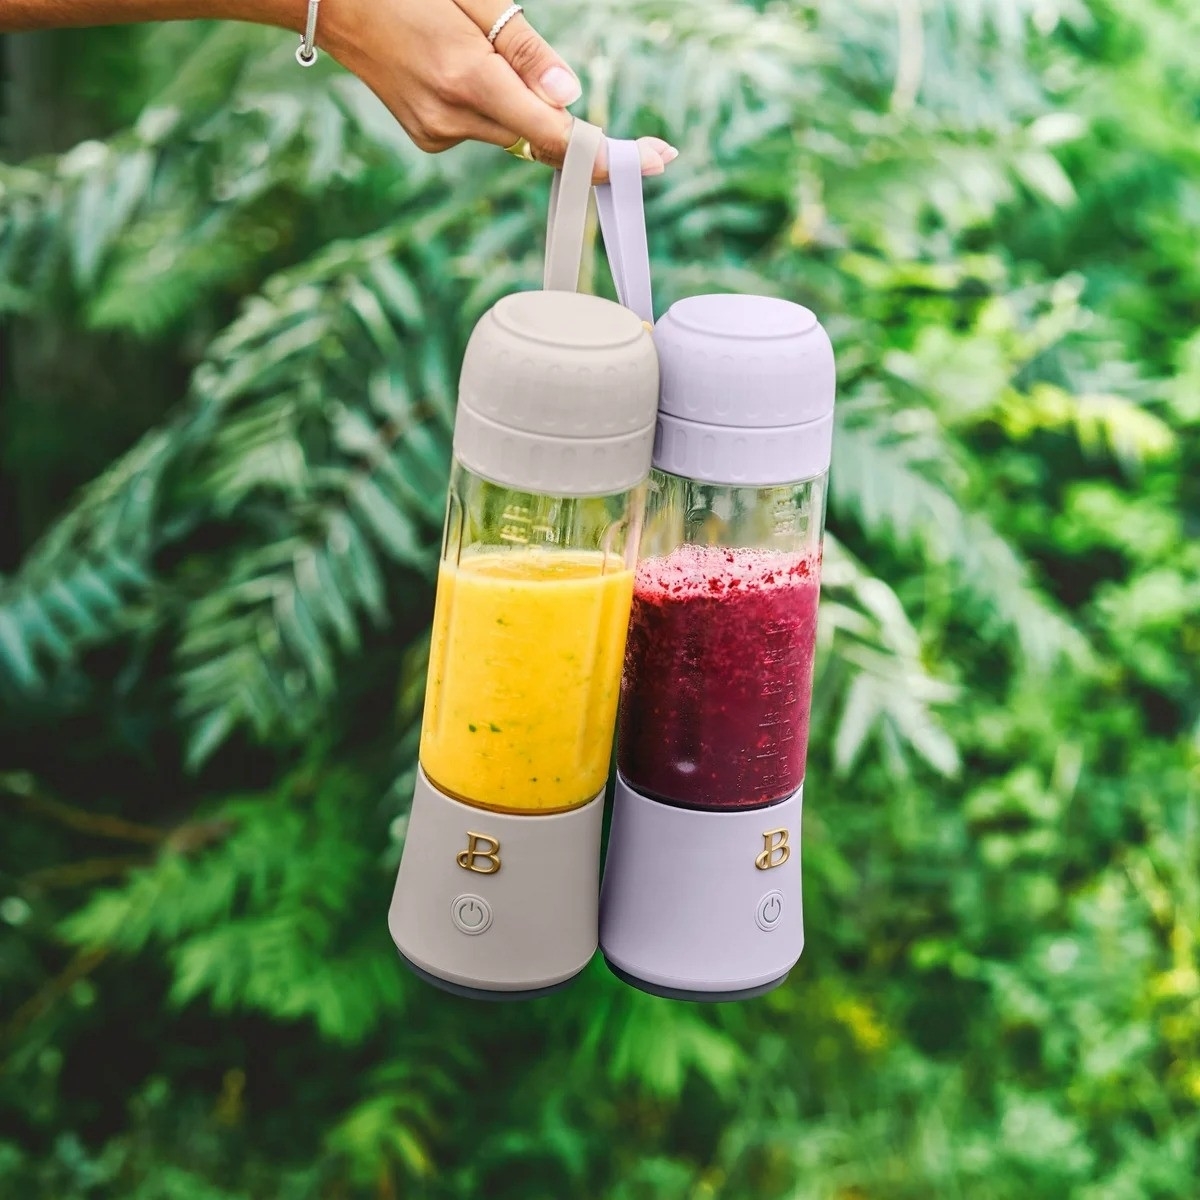 Hand holding two portable blenders with yellow and red smoothies against a backdrop of green leaves